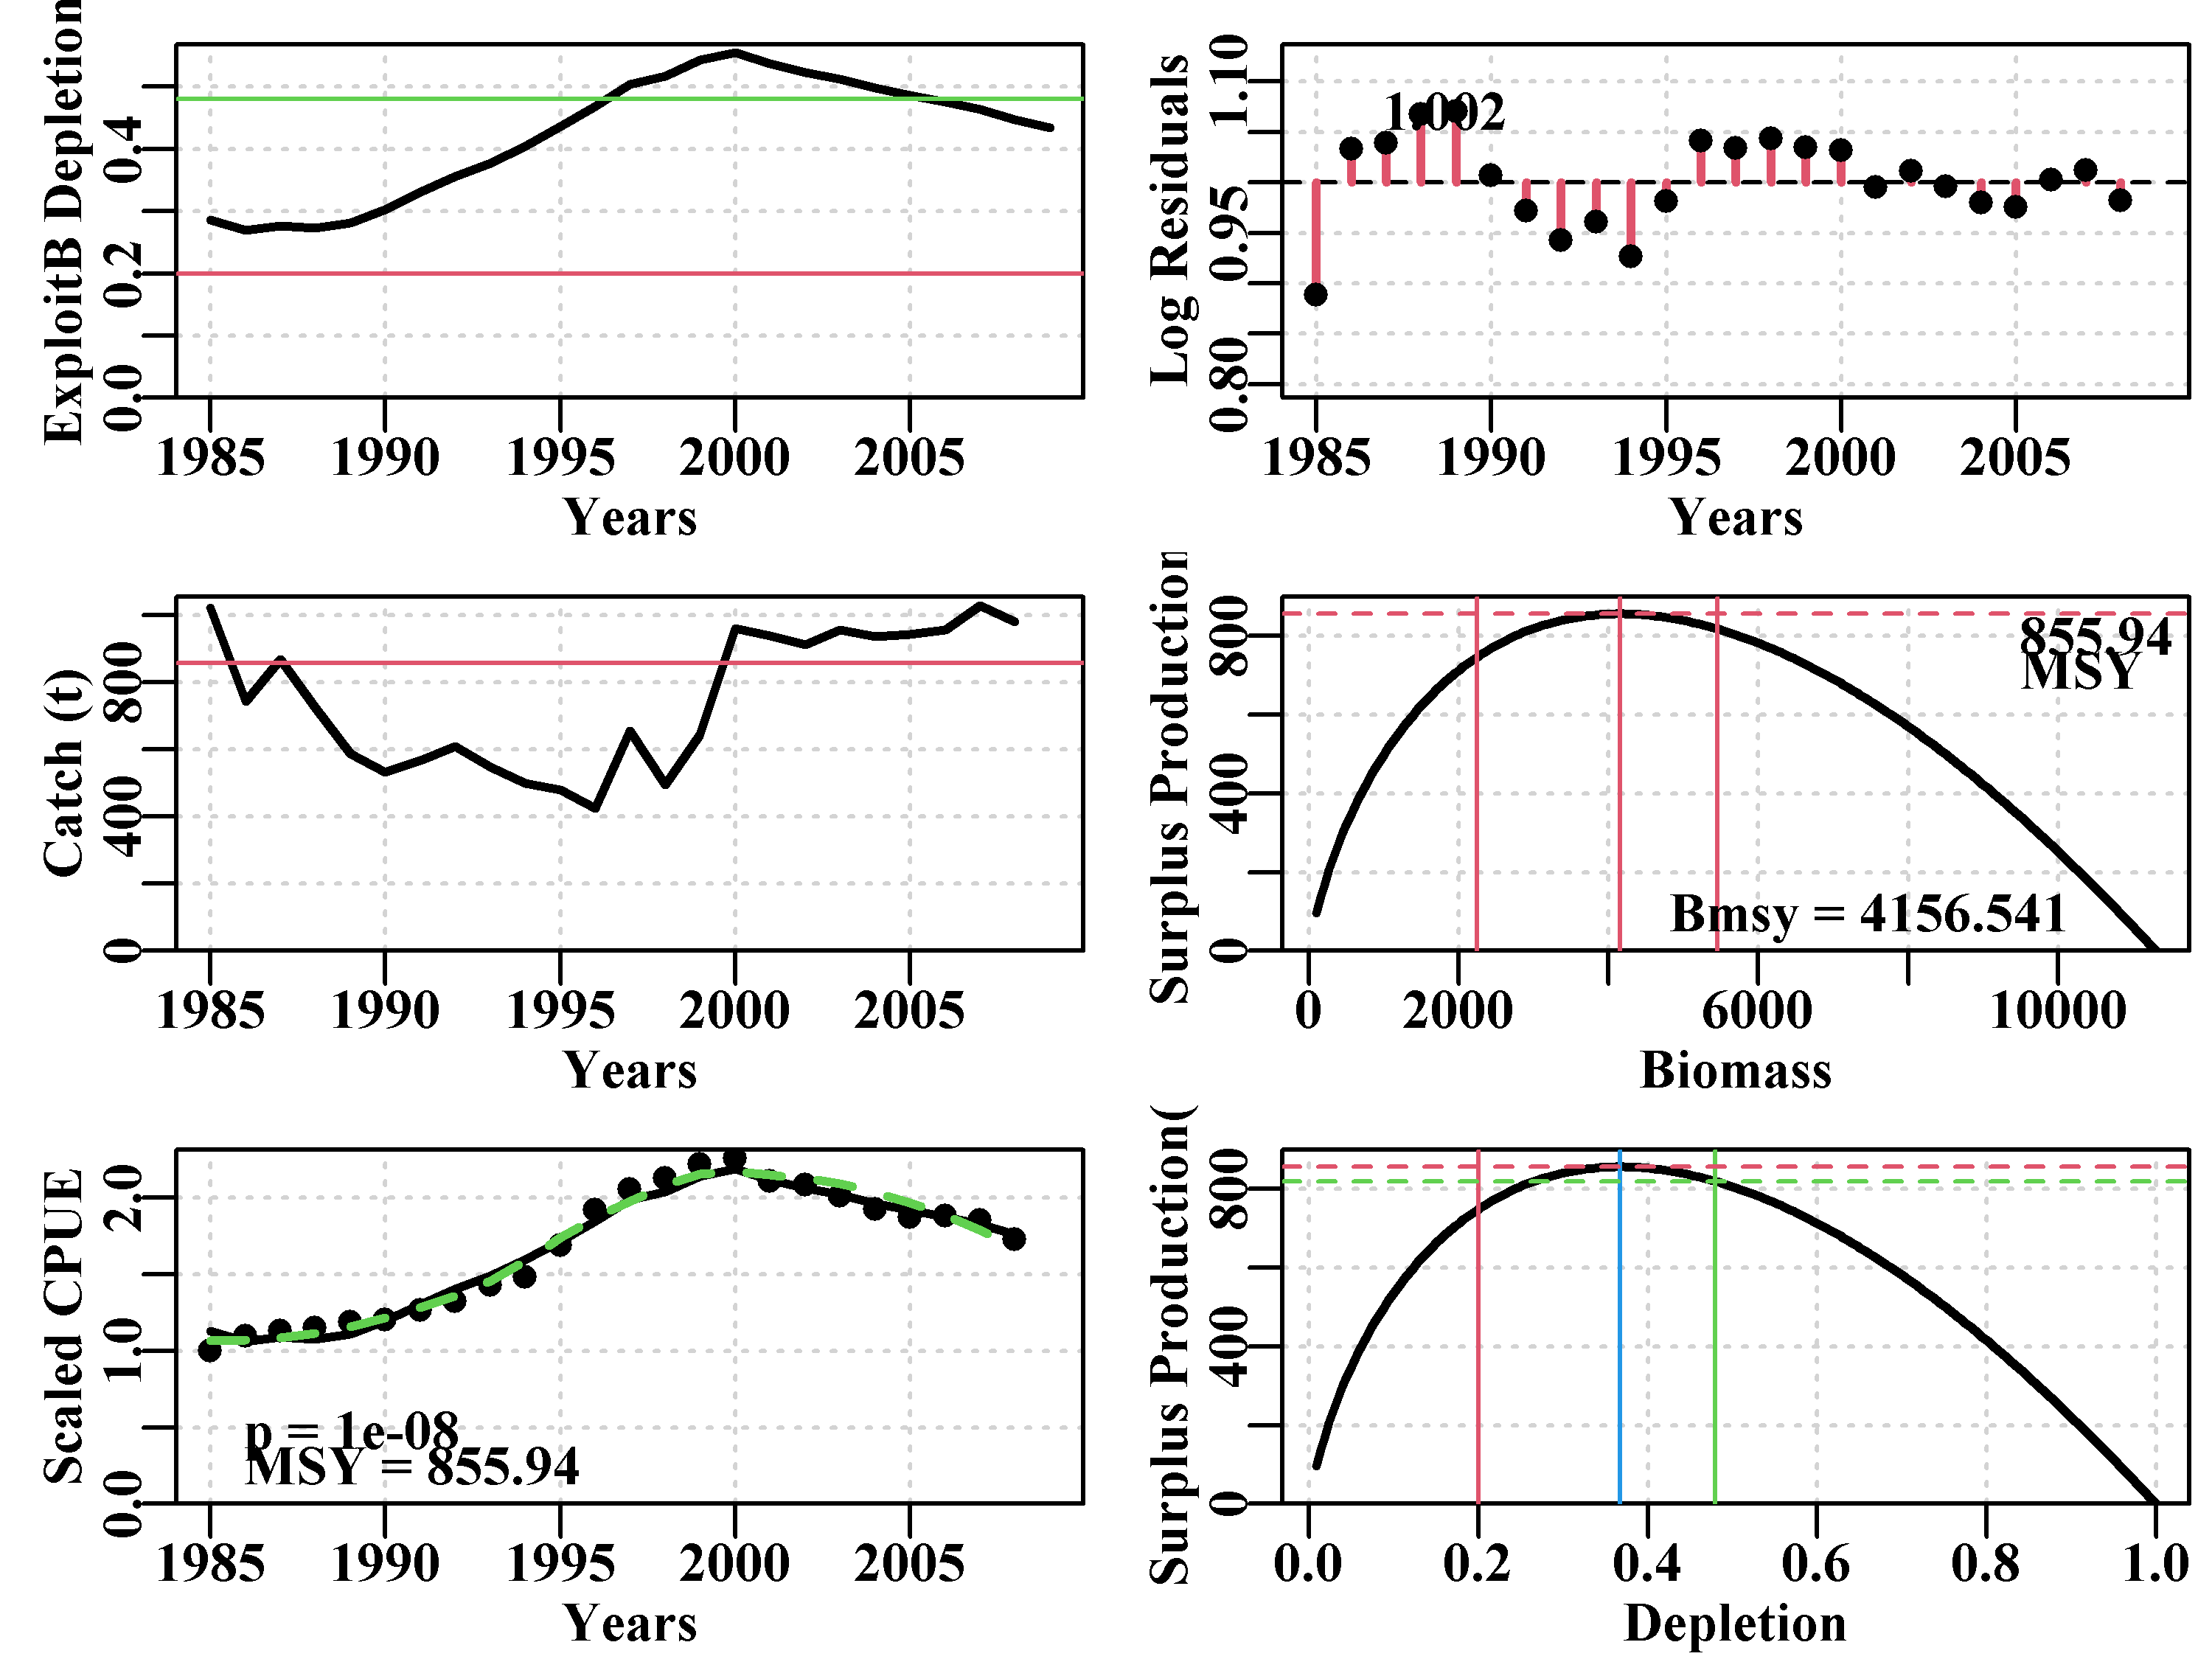 The optimum model fit for the abdat data-set using the Fox model and log-normal errors. The green dashed line is a smoother curve while the red line is the optimum predicted model fit. Note the pattern in the log-normal residuals indicating that the model has small inadequacies with regard to this data.